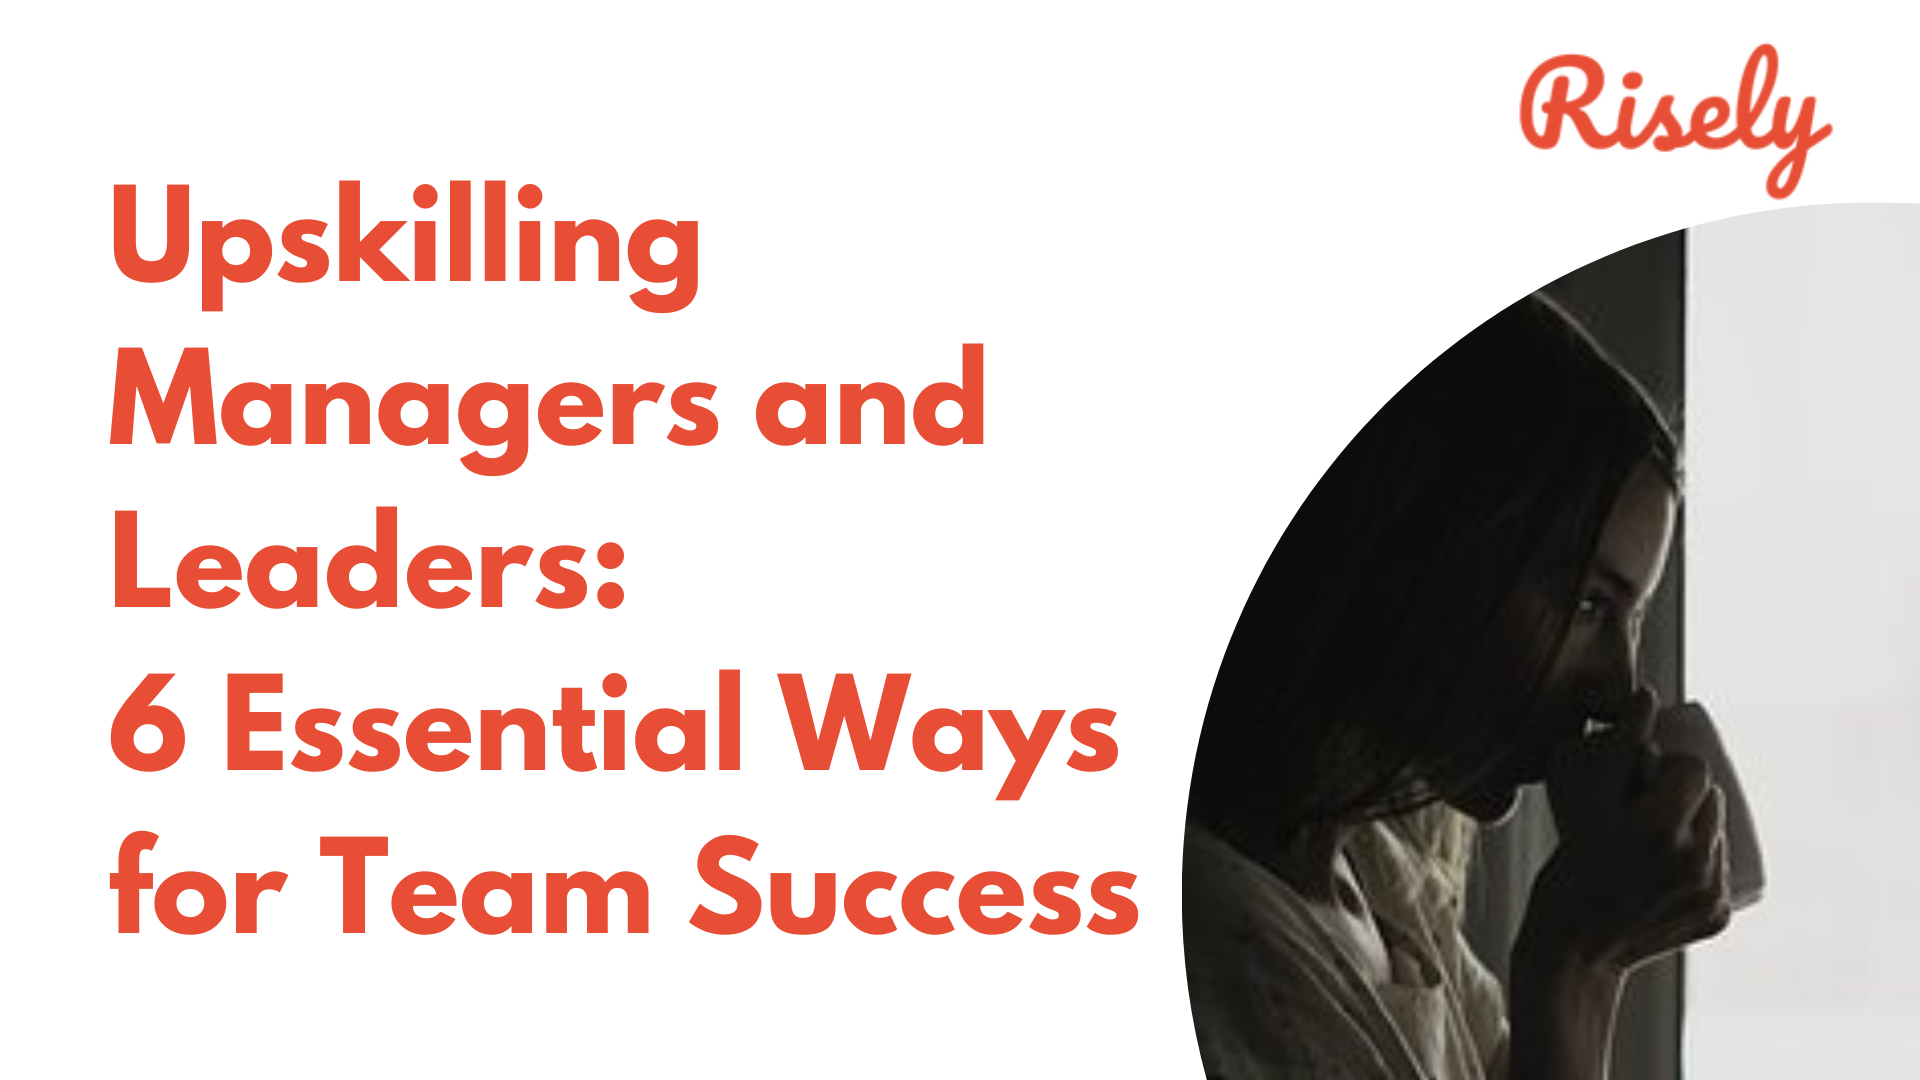 Upskilling Managers and Leaders: 6 Essential Ways for Team Success